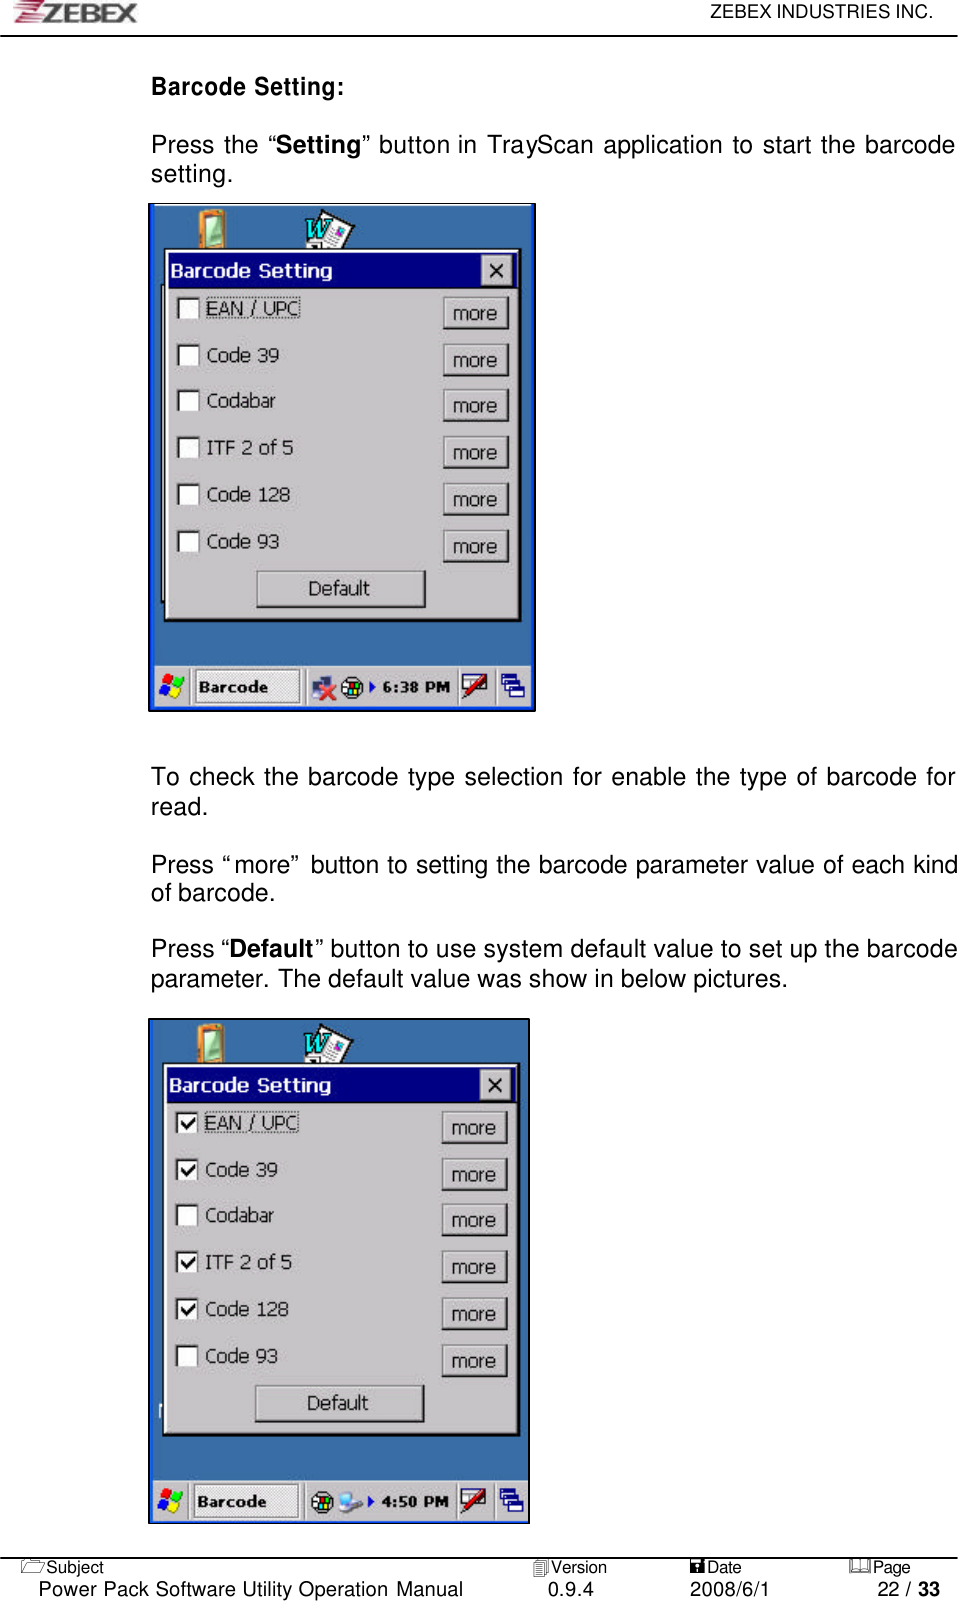     ZEBEX INDUSTRIES INC.   1Subject 4Version           =Date &amp;Page  Power Pack Software Utility Operation Manual 0.9.4    2008/6/1          22 / 33 Barcode Setting:  Press the “Setting” button in TrayScan application to start the barcode setting.                     To check the barcode type selection for enable the type of barcode for read.  Press “more” button to setting the barcode parameter value of each kind of barcode.  Press “Default” button to use system default value to set up the barcode parameter. The default value was show in below pictures.                    